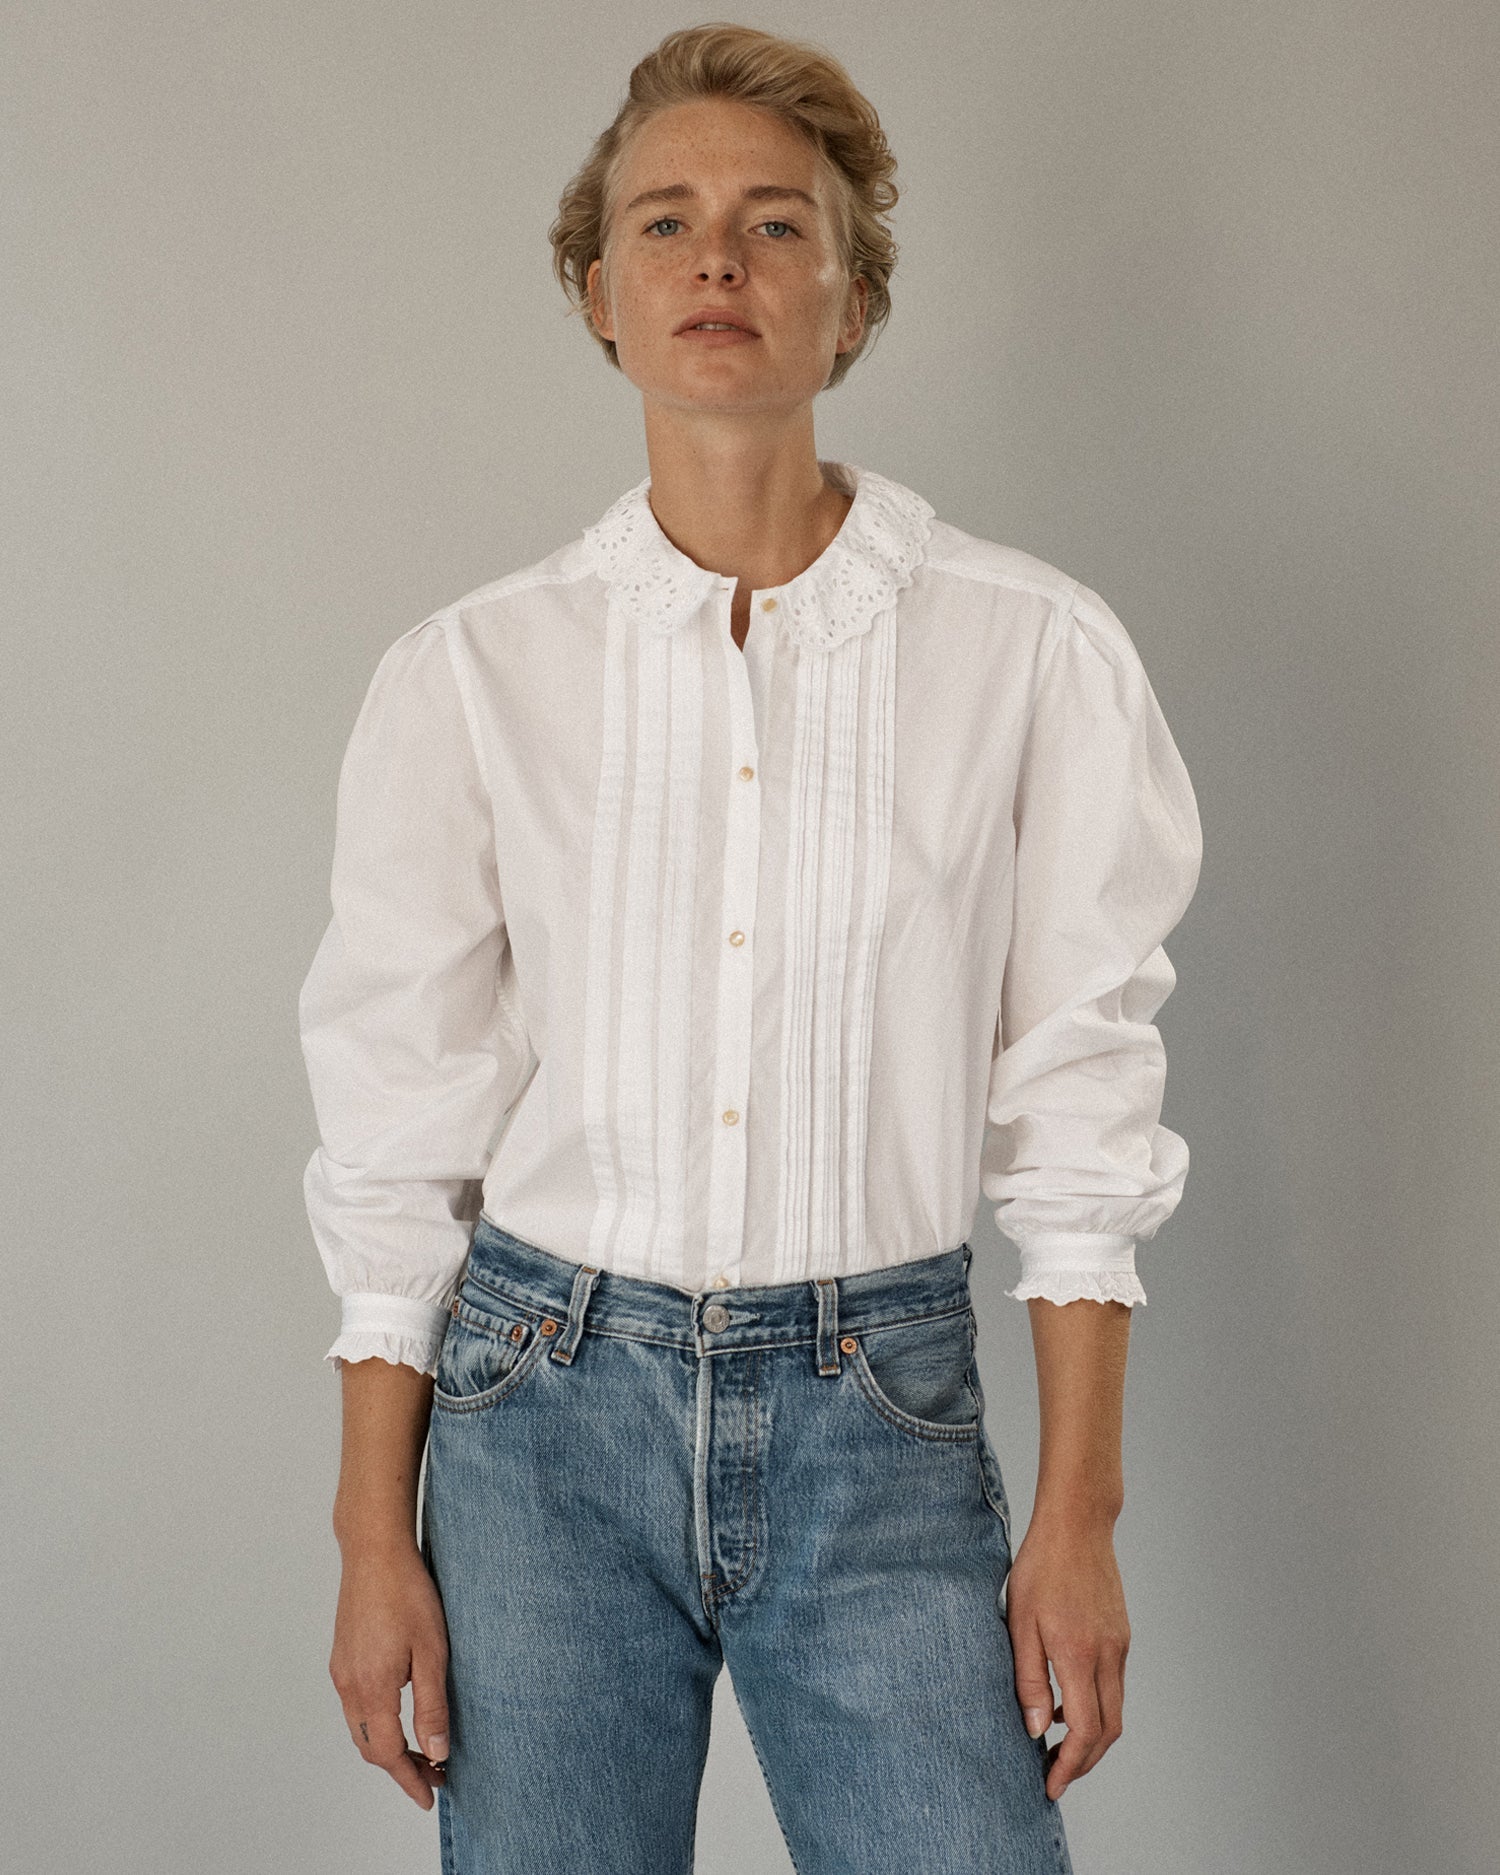 Woman standing and wearing a long sleeve button-down blouse and jeans. Blouse is white cotton with tucks and eyelet trim.